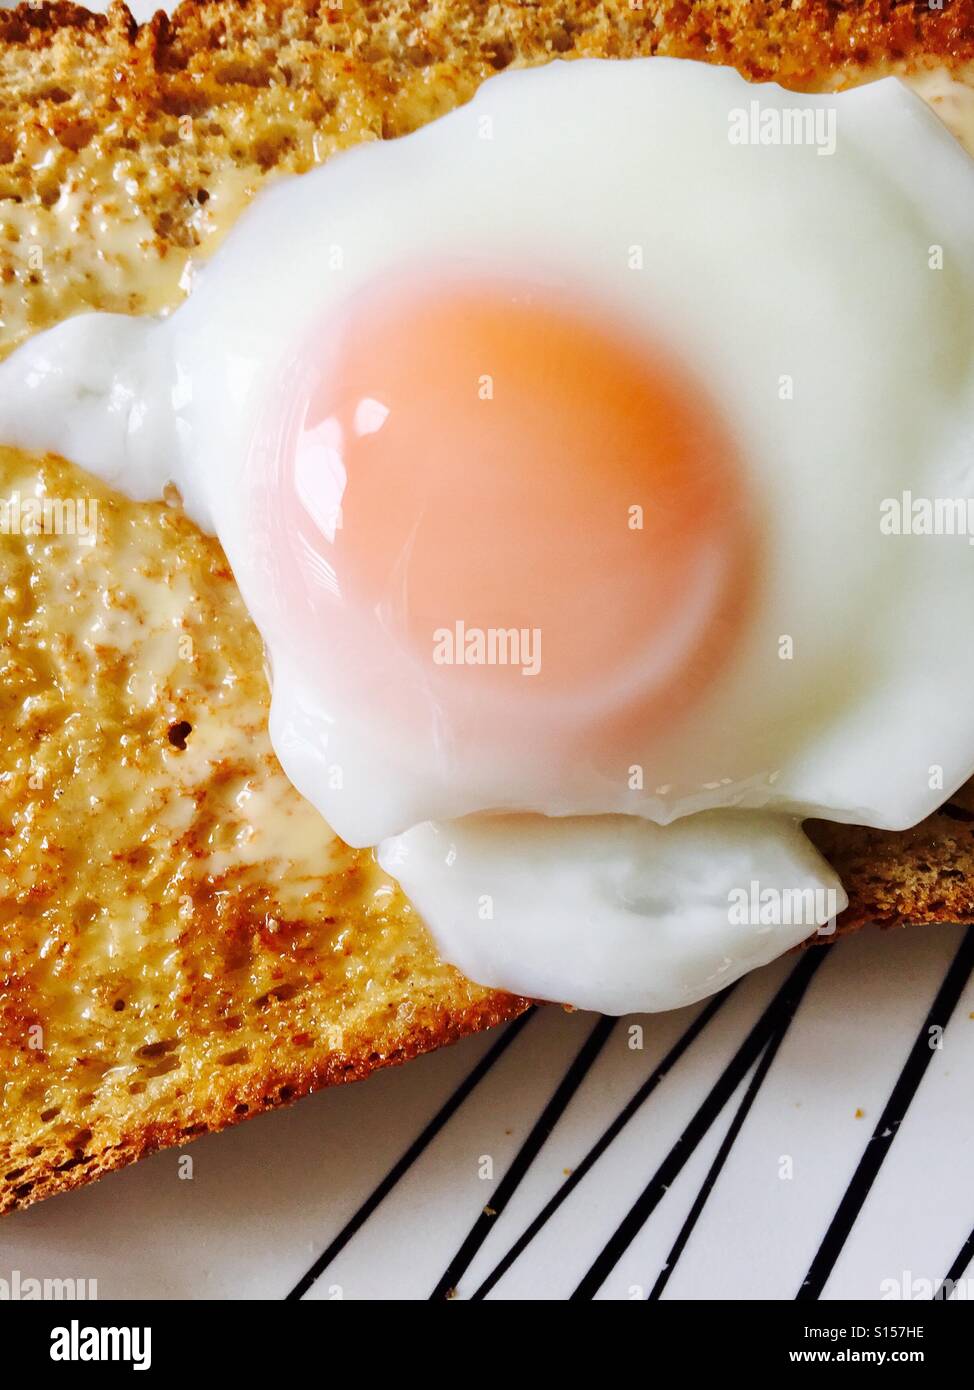 Poached egg on brown toast Stock Photo